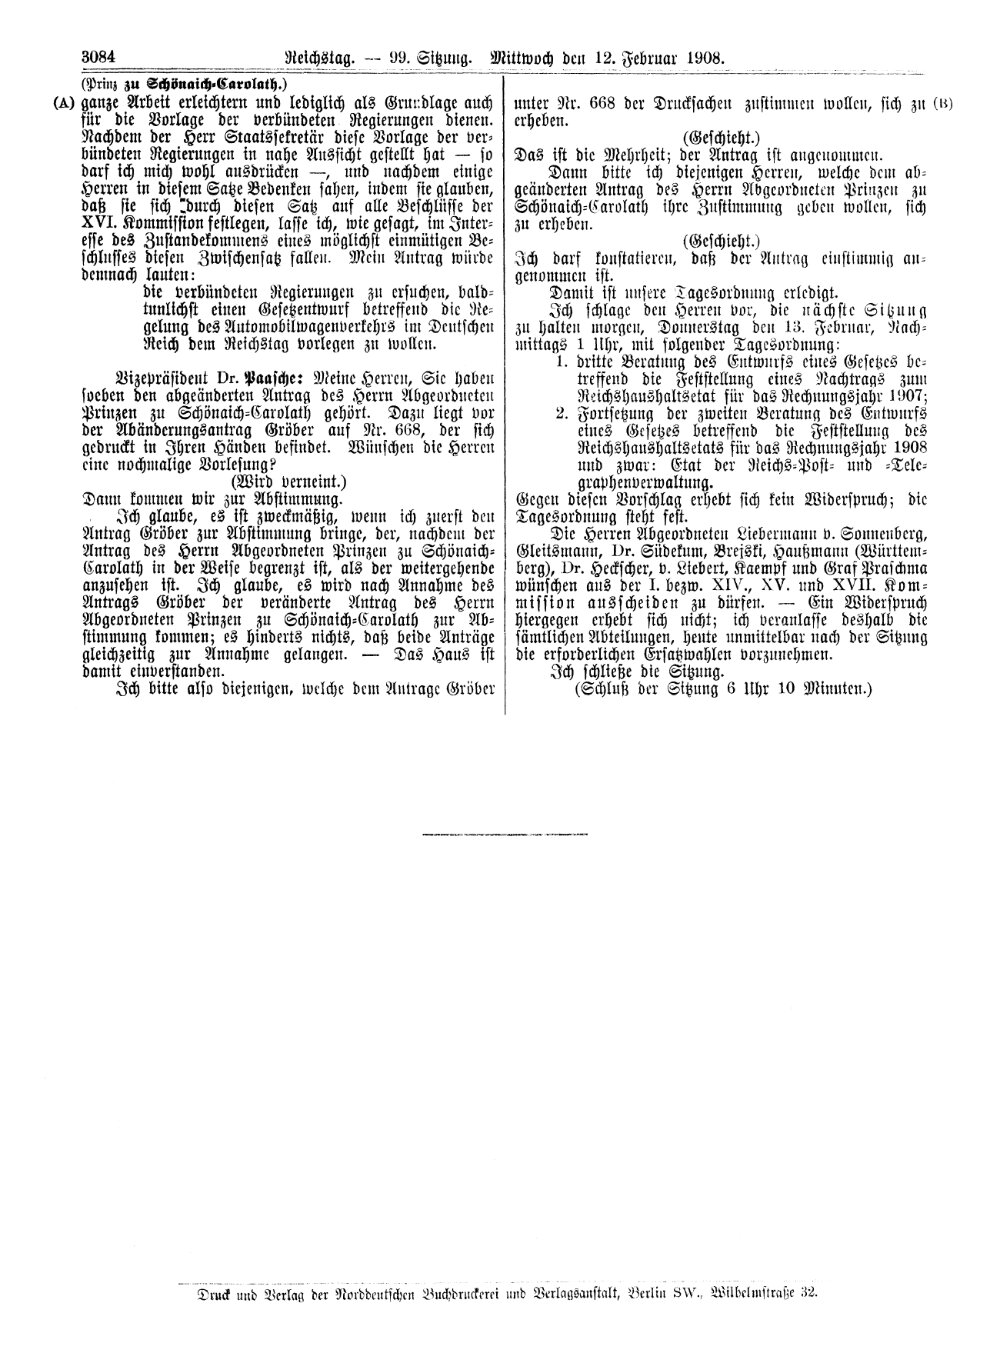 Scan of page 3084